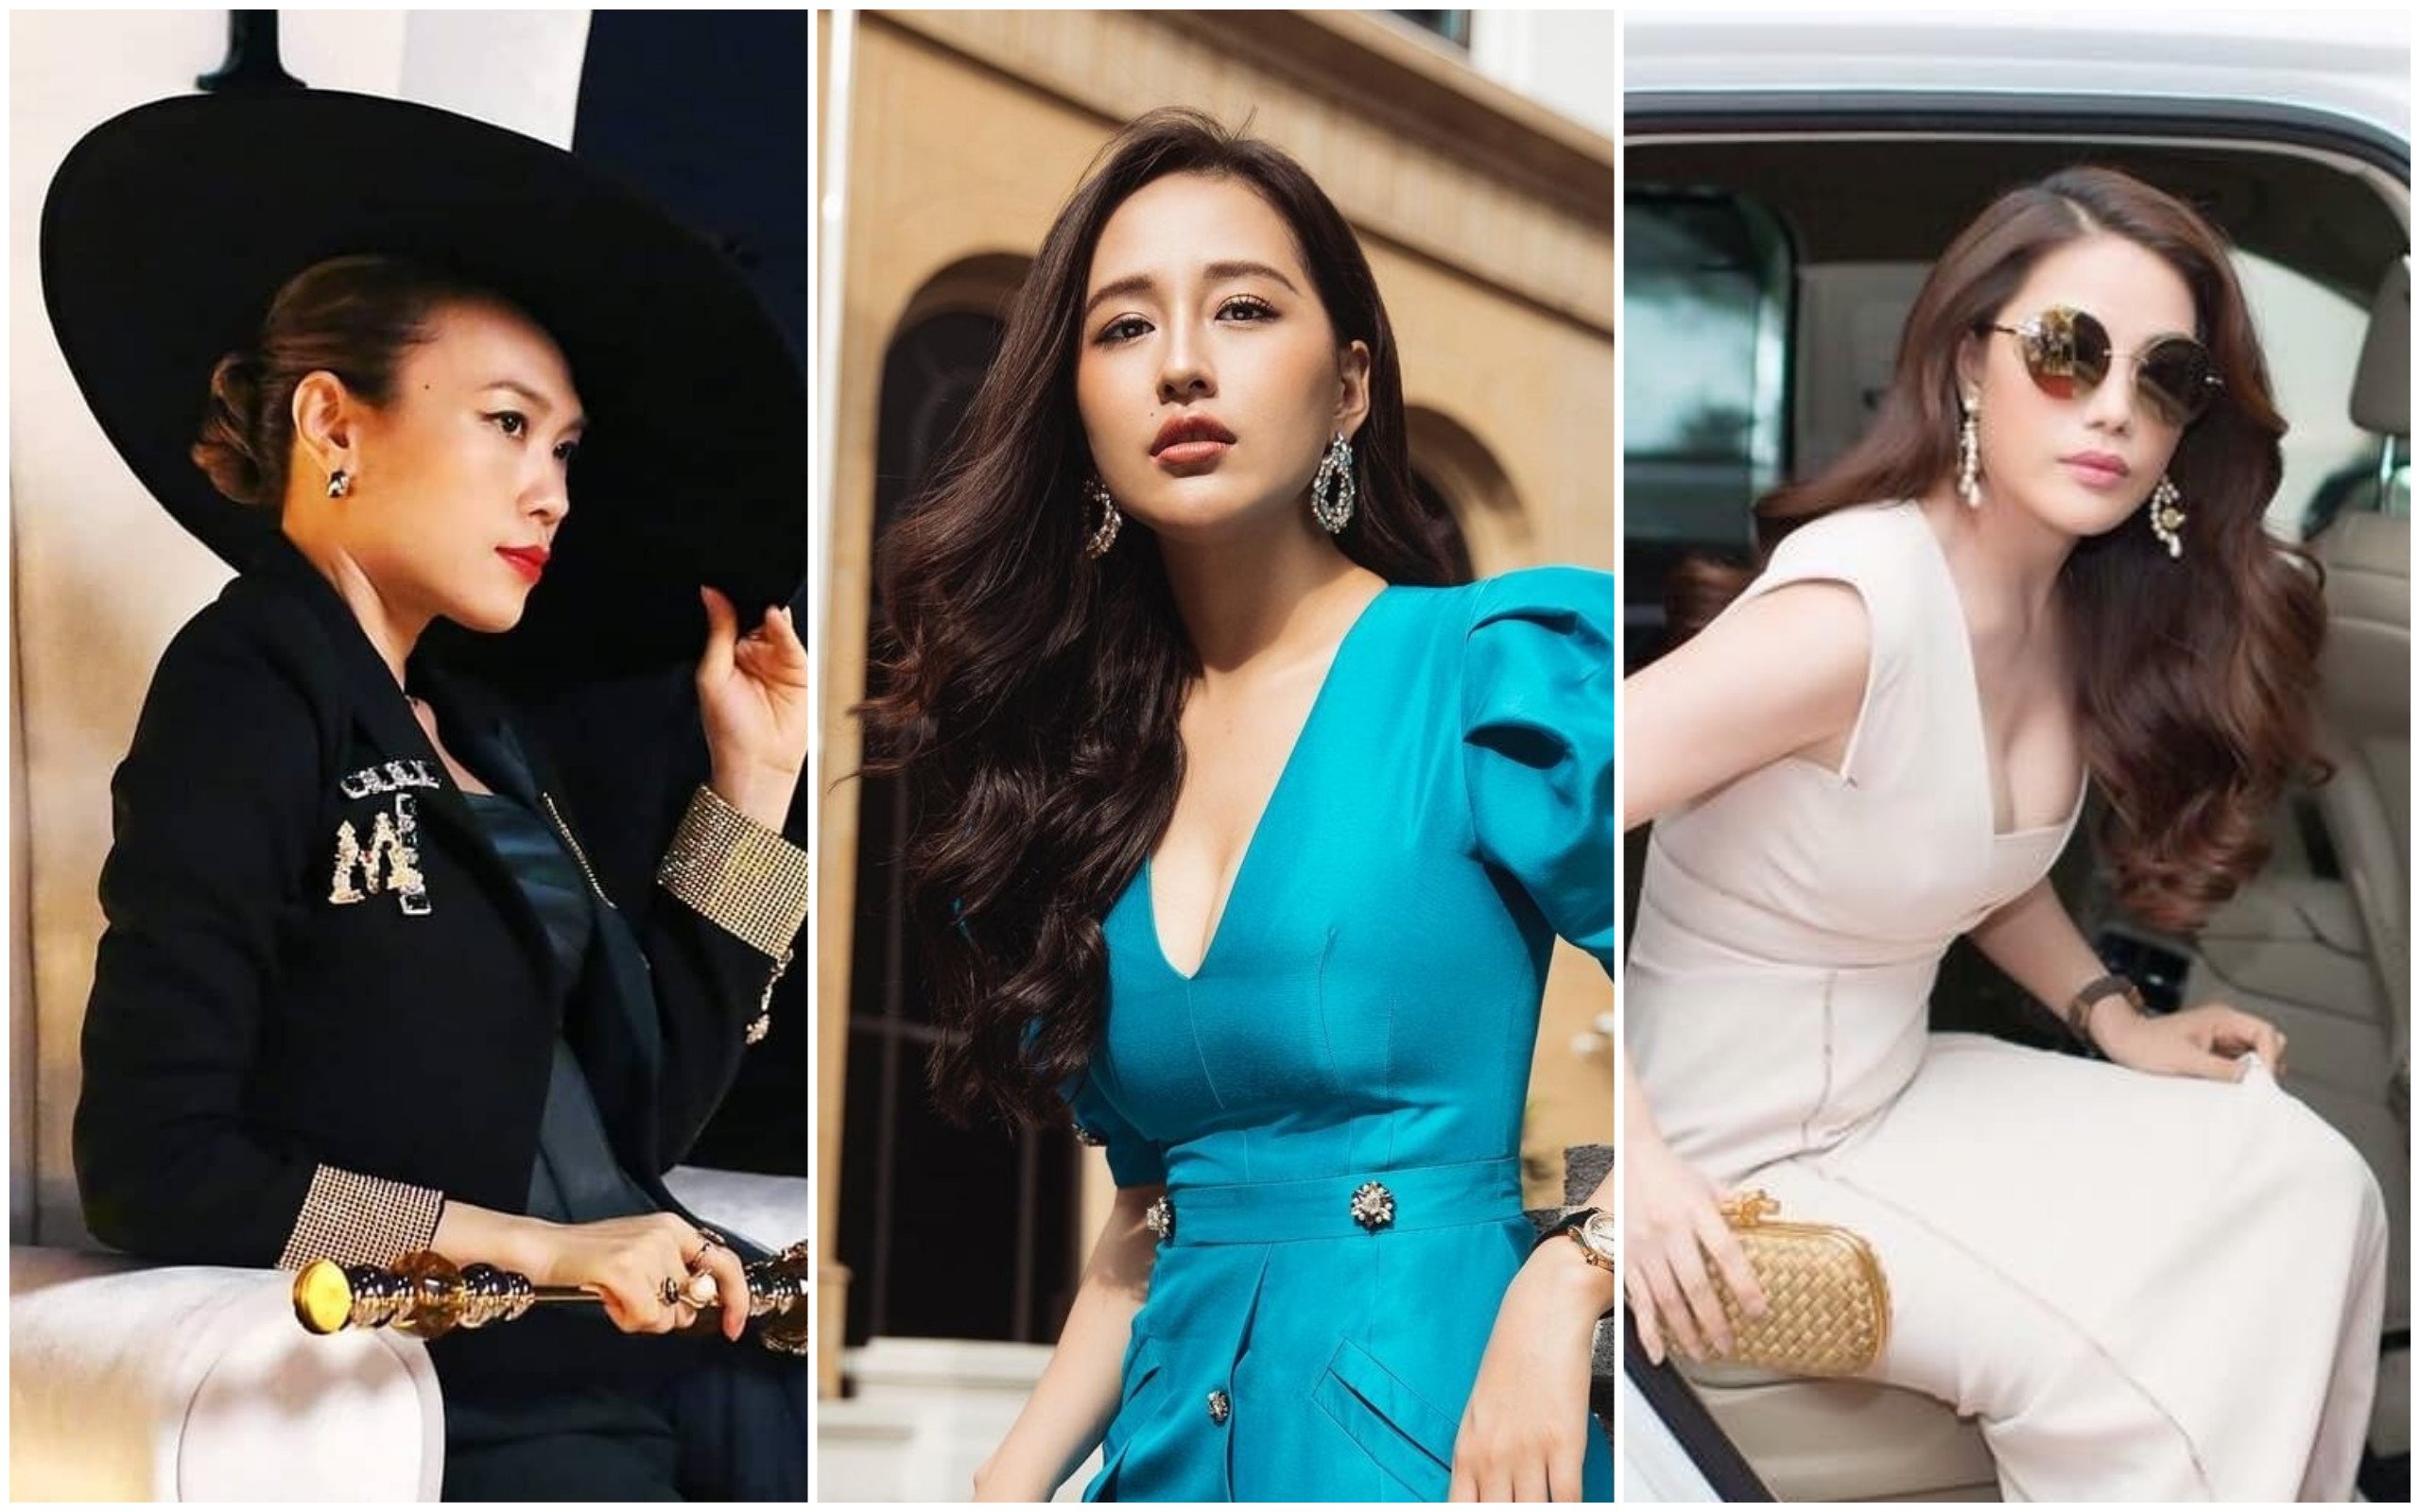 My Tam, Mai Phuong Thuy and Truong Ngoc Anh are among Vietnam’s most successful women, having started as singers, models or actresses and today running their own profitable businesses. Photos: @mytam.info; @mpt681988; @truongngocanh_official/Instagram